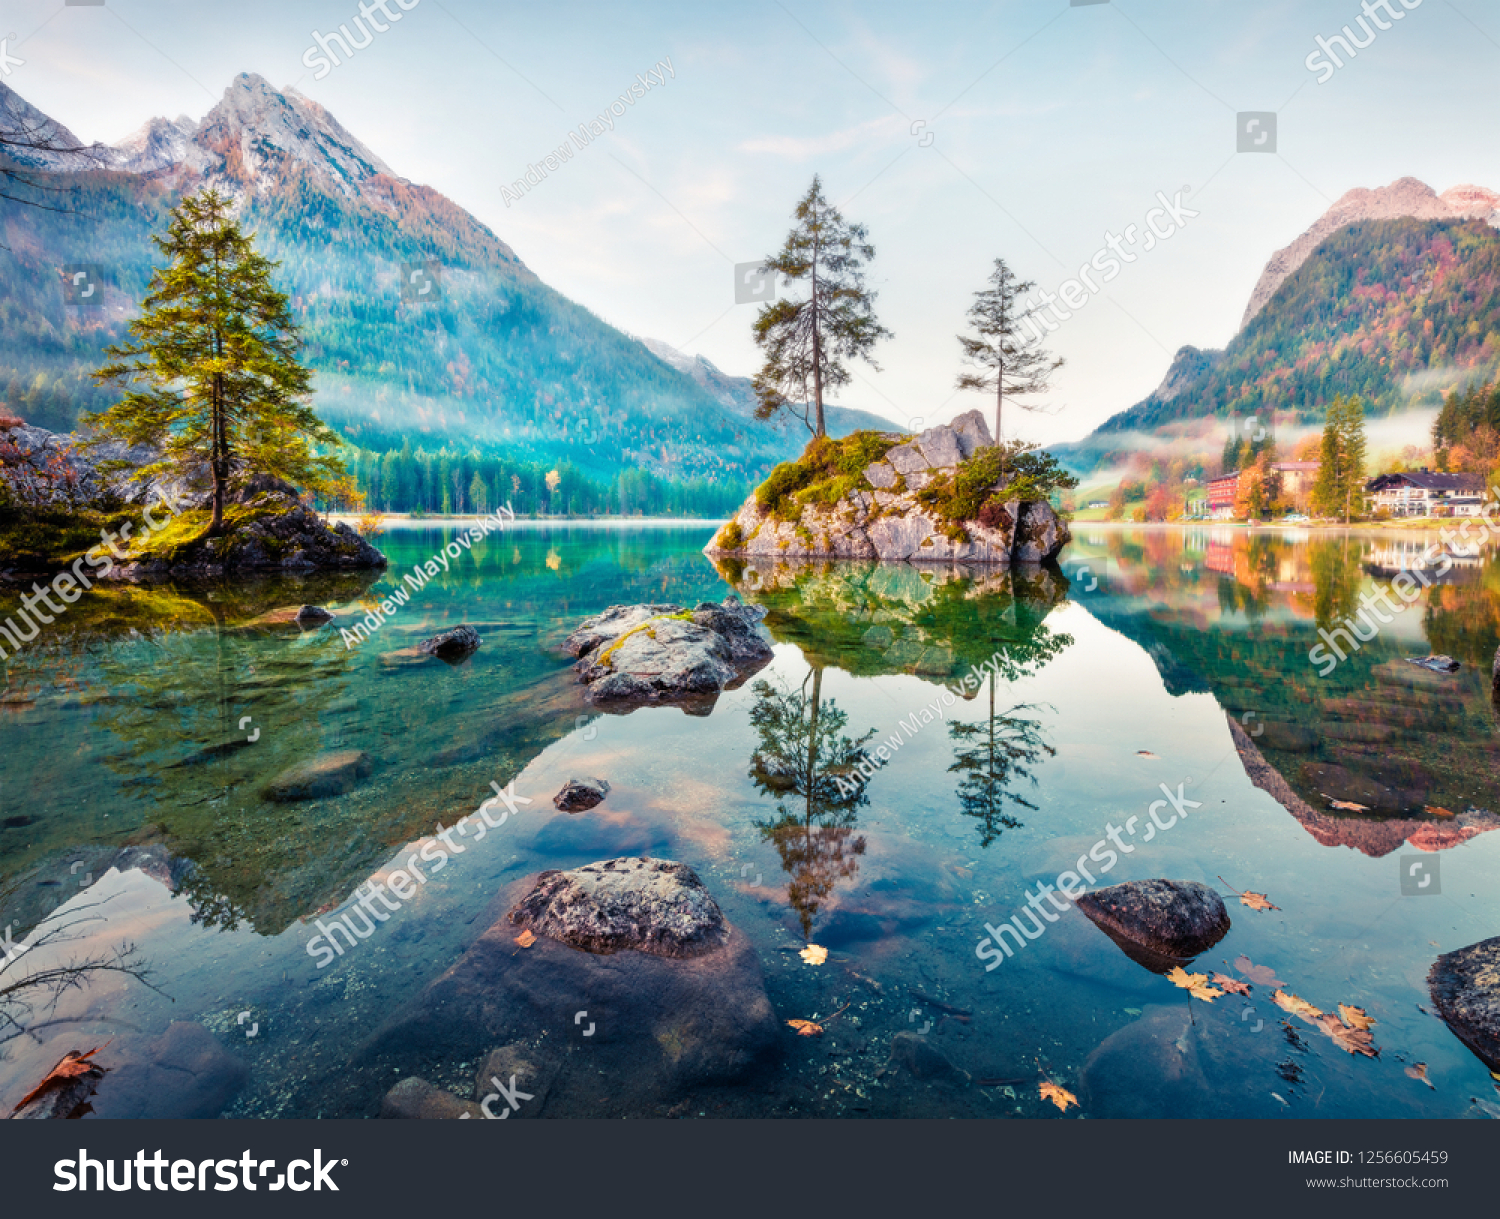 Dreamy autumn scene of Hintersee lake. Romantic morning view of Bavarian Alps on the Austrian border, Germany, Europe. Beauty of nature concept background. Orton Effect.
 #1256605459